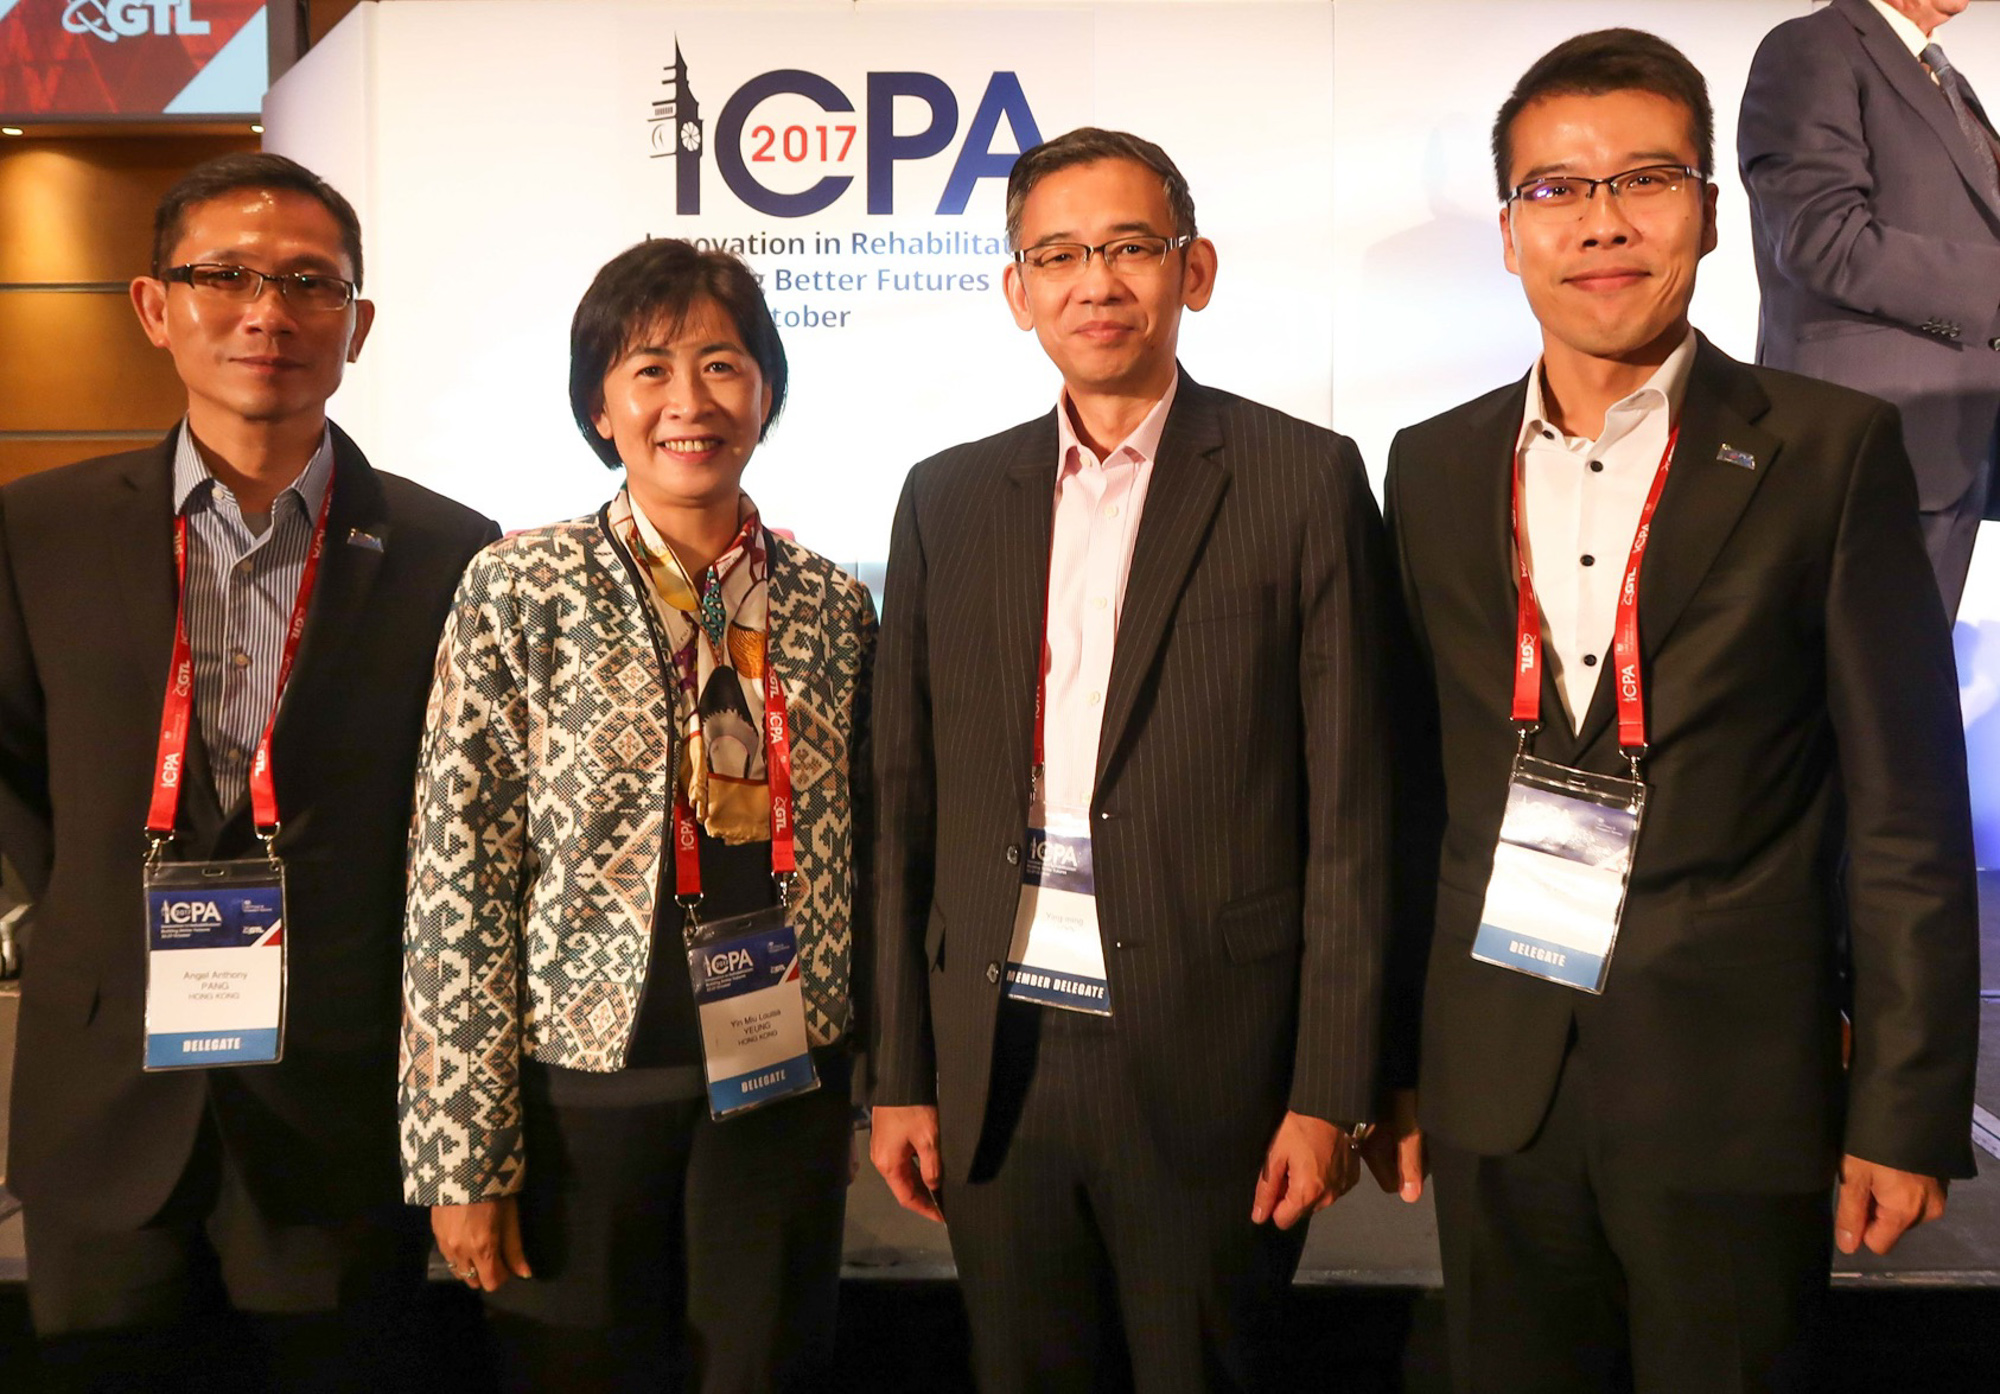 Departmental delegation attended the 19th Annual Conference of ICPA in London, UK.